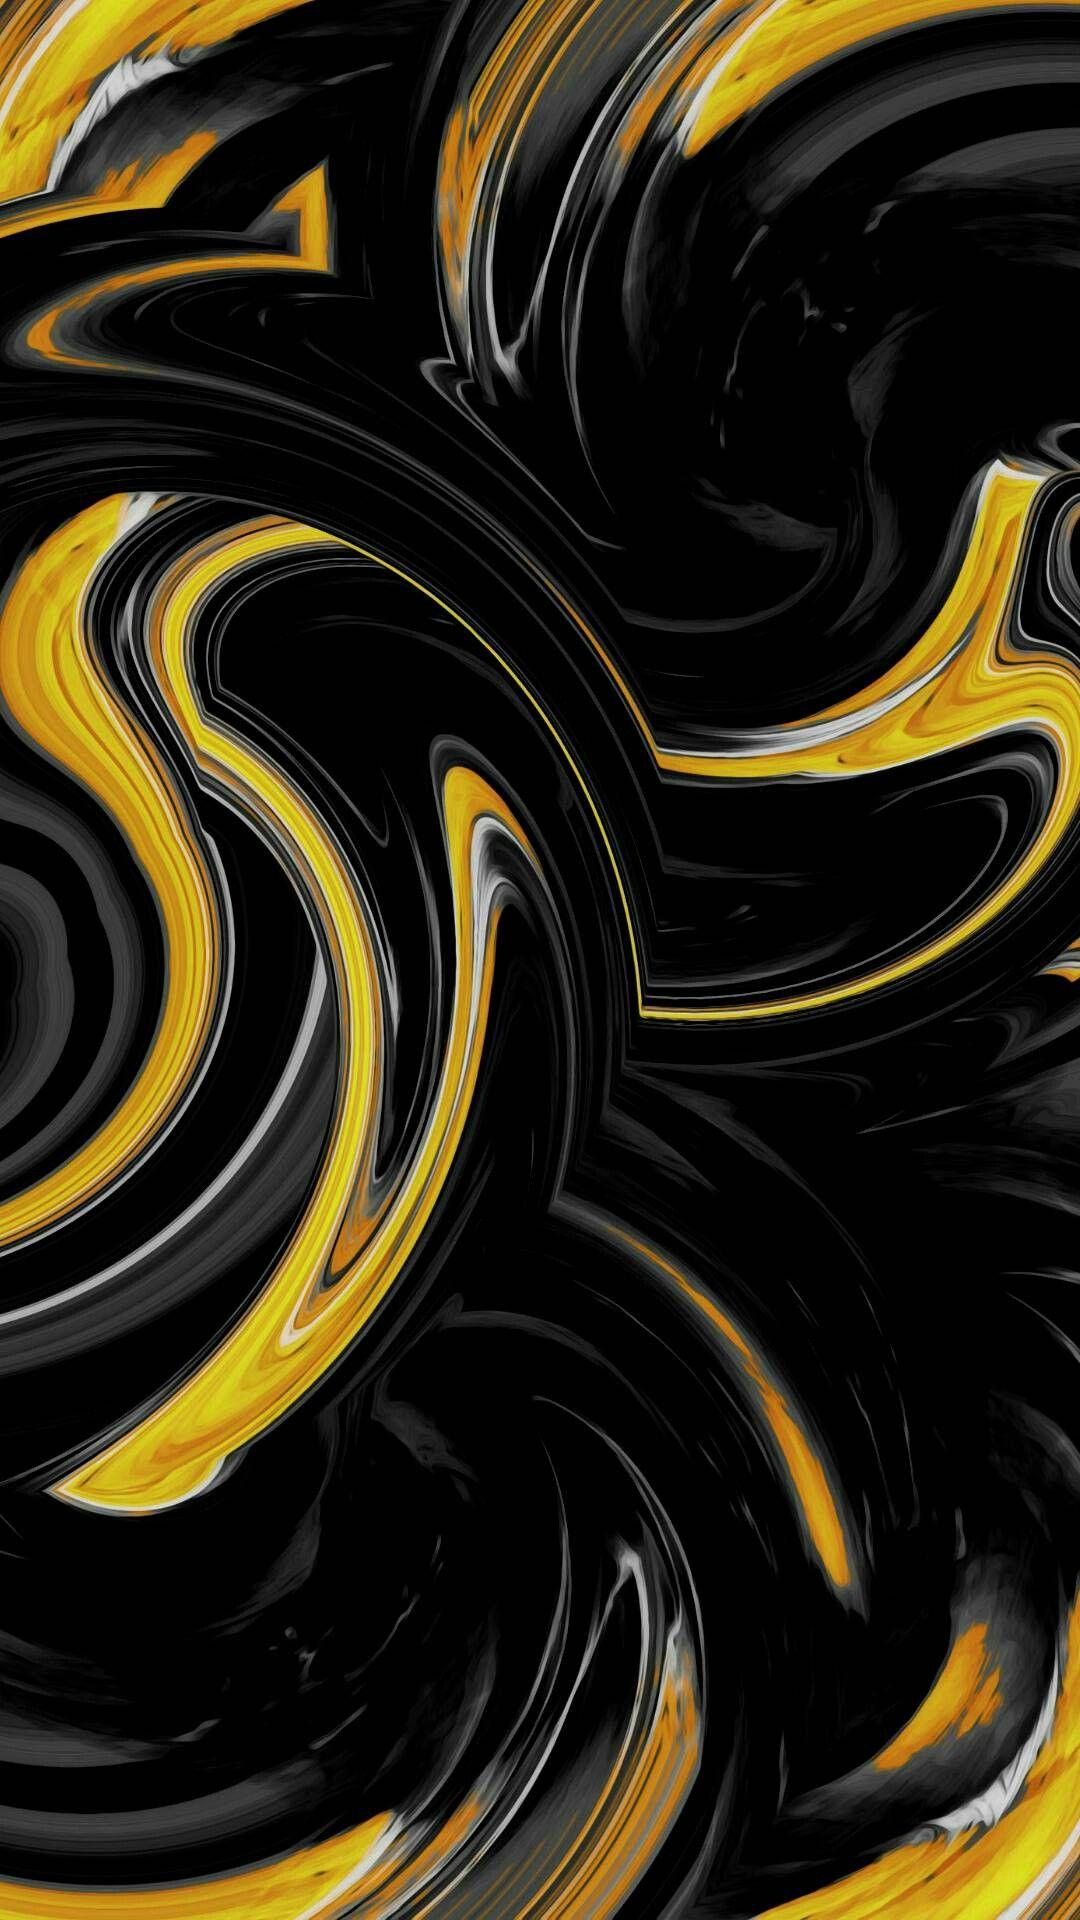 Black and Yellow Phone Wallpaper Free Black and Yellow Phone Background